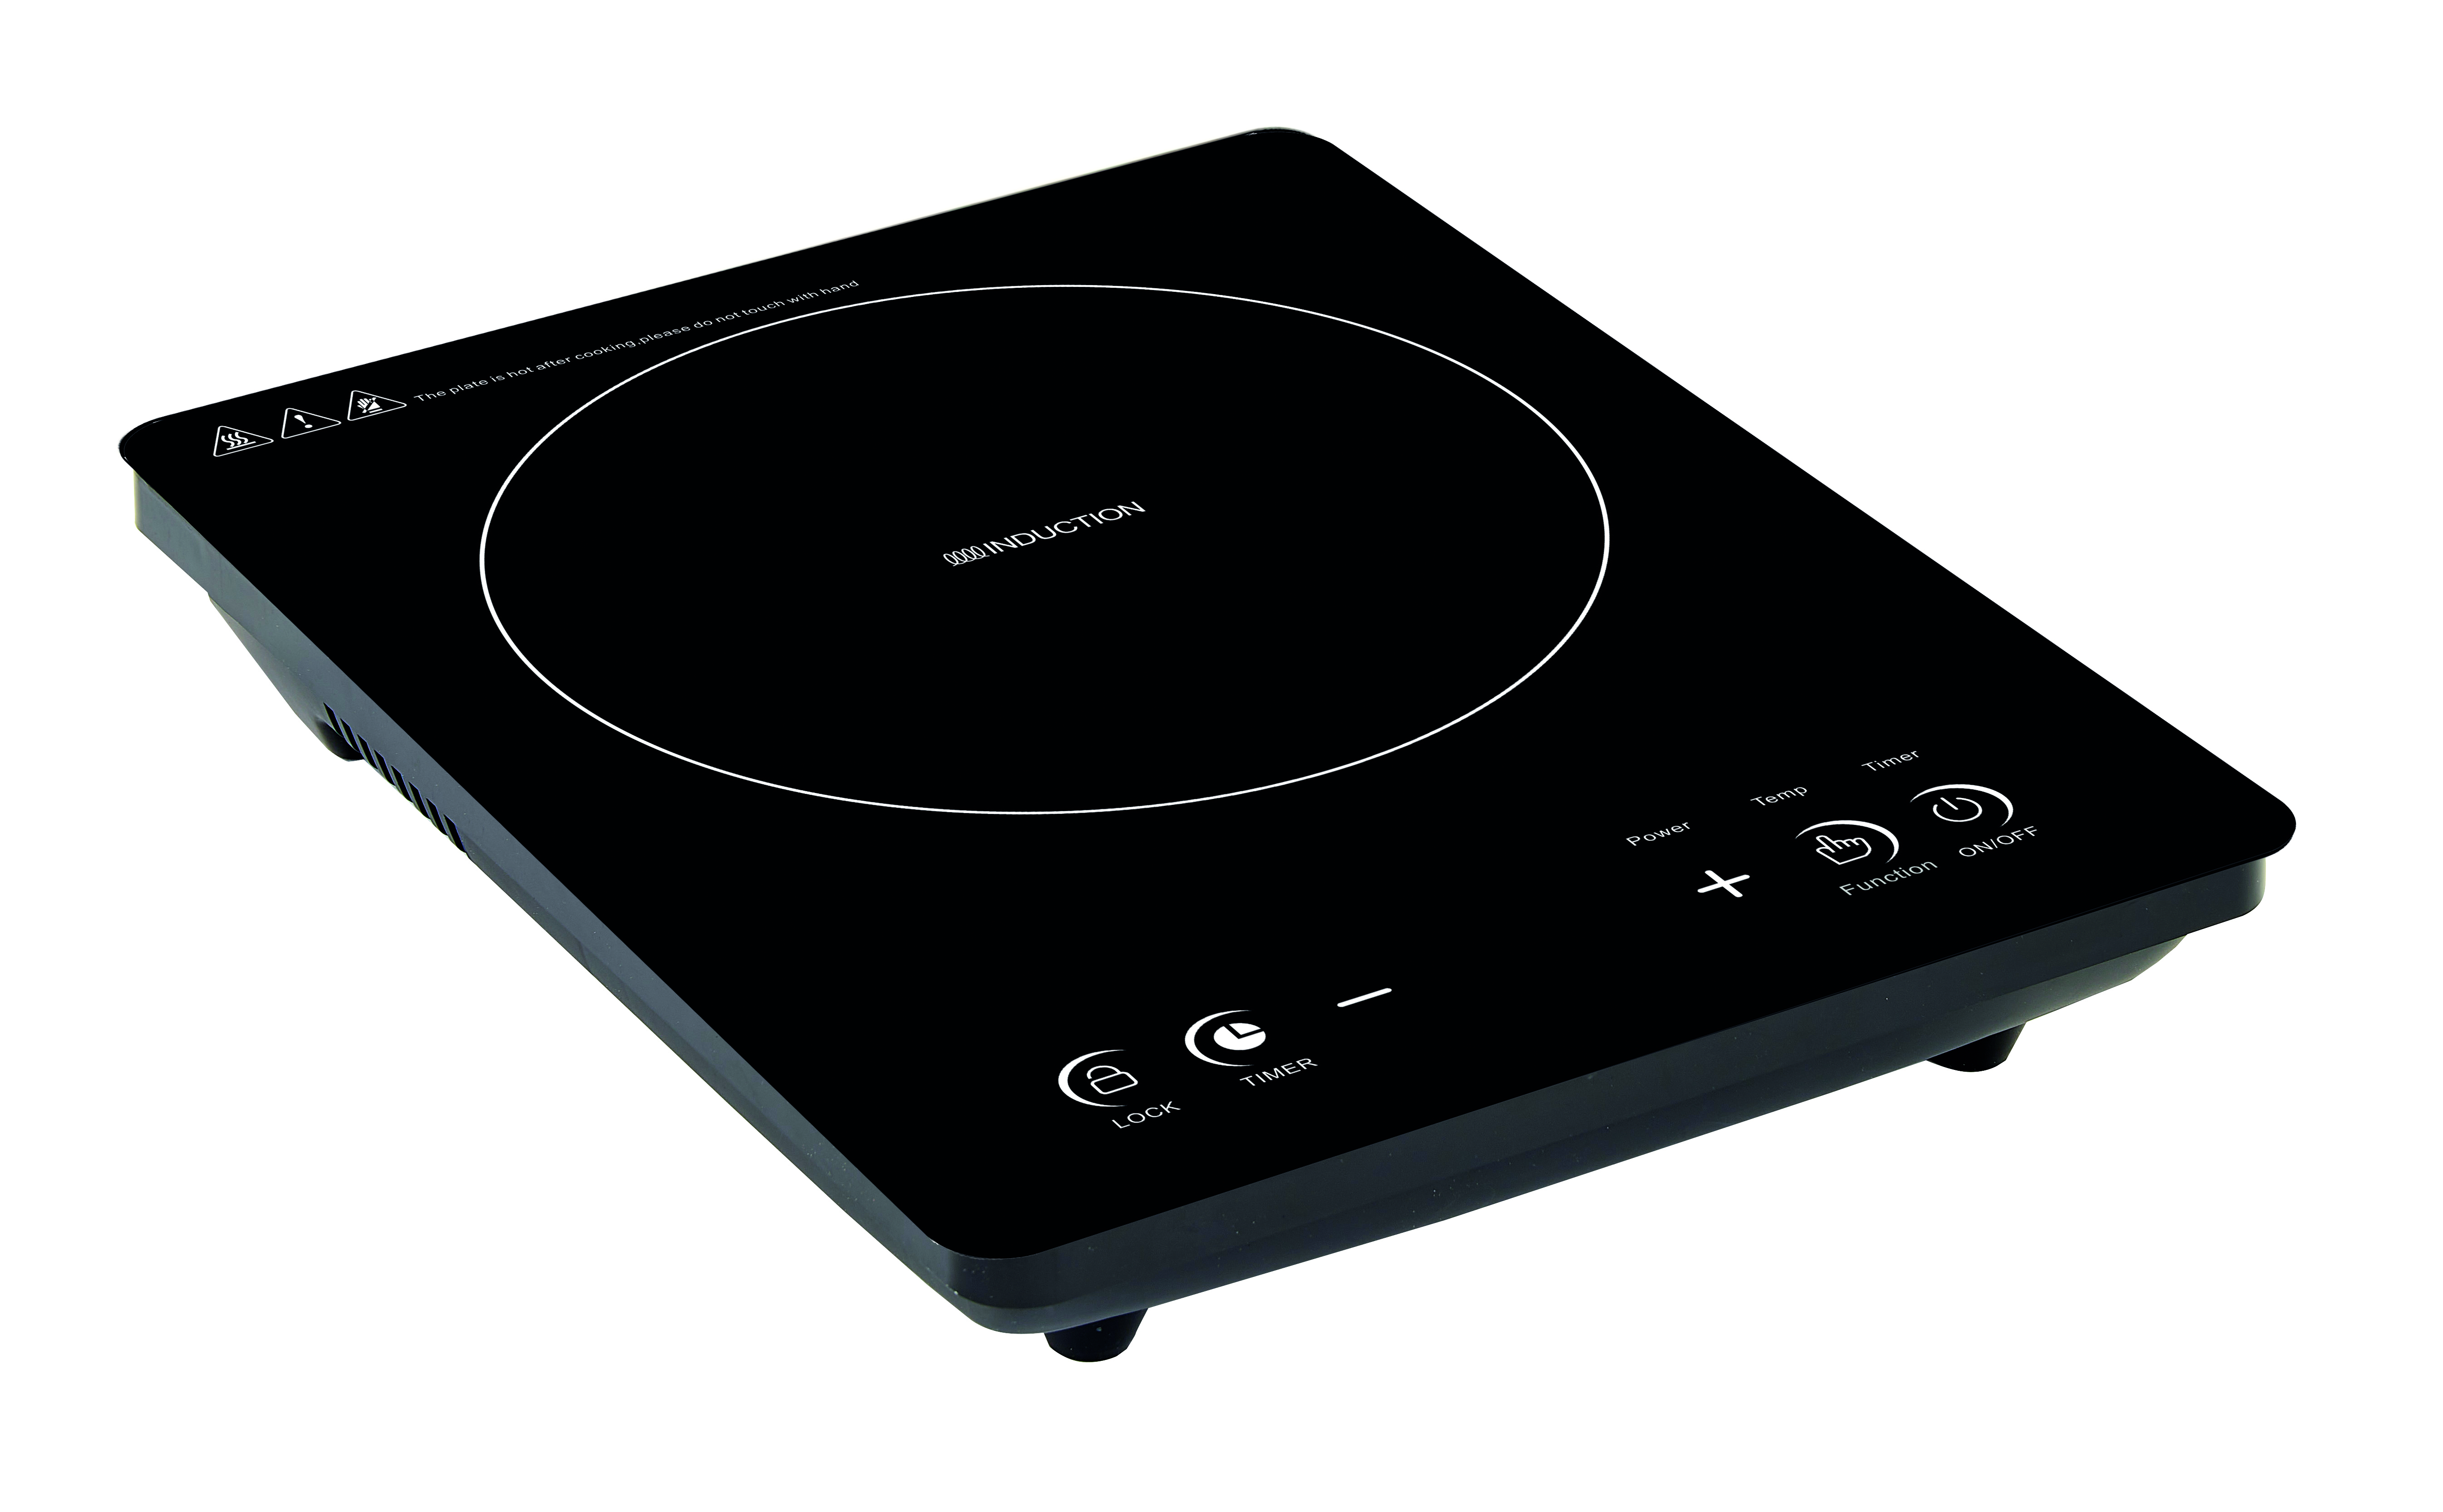 Portable Induction Cooktop Hot Plate Countertop Burner 2000W, Timer, Auto-Shut-Off, Touch Panel, LED Display, Multifunctional, AM-D121 